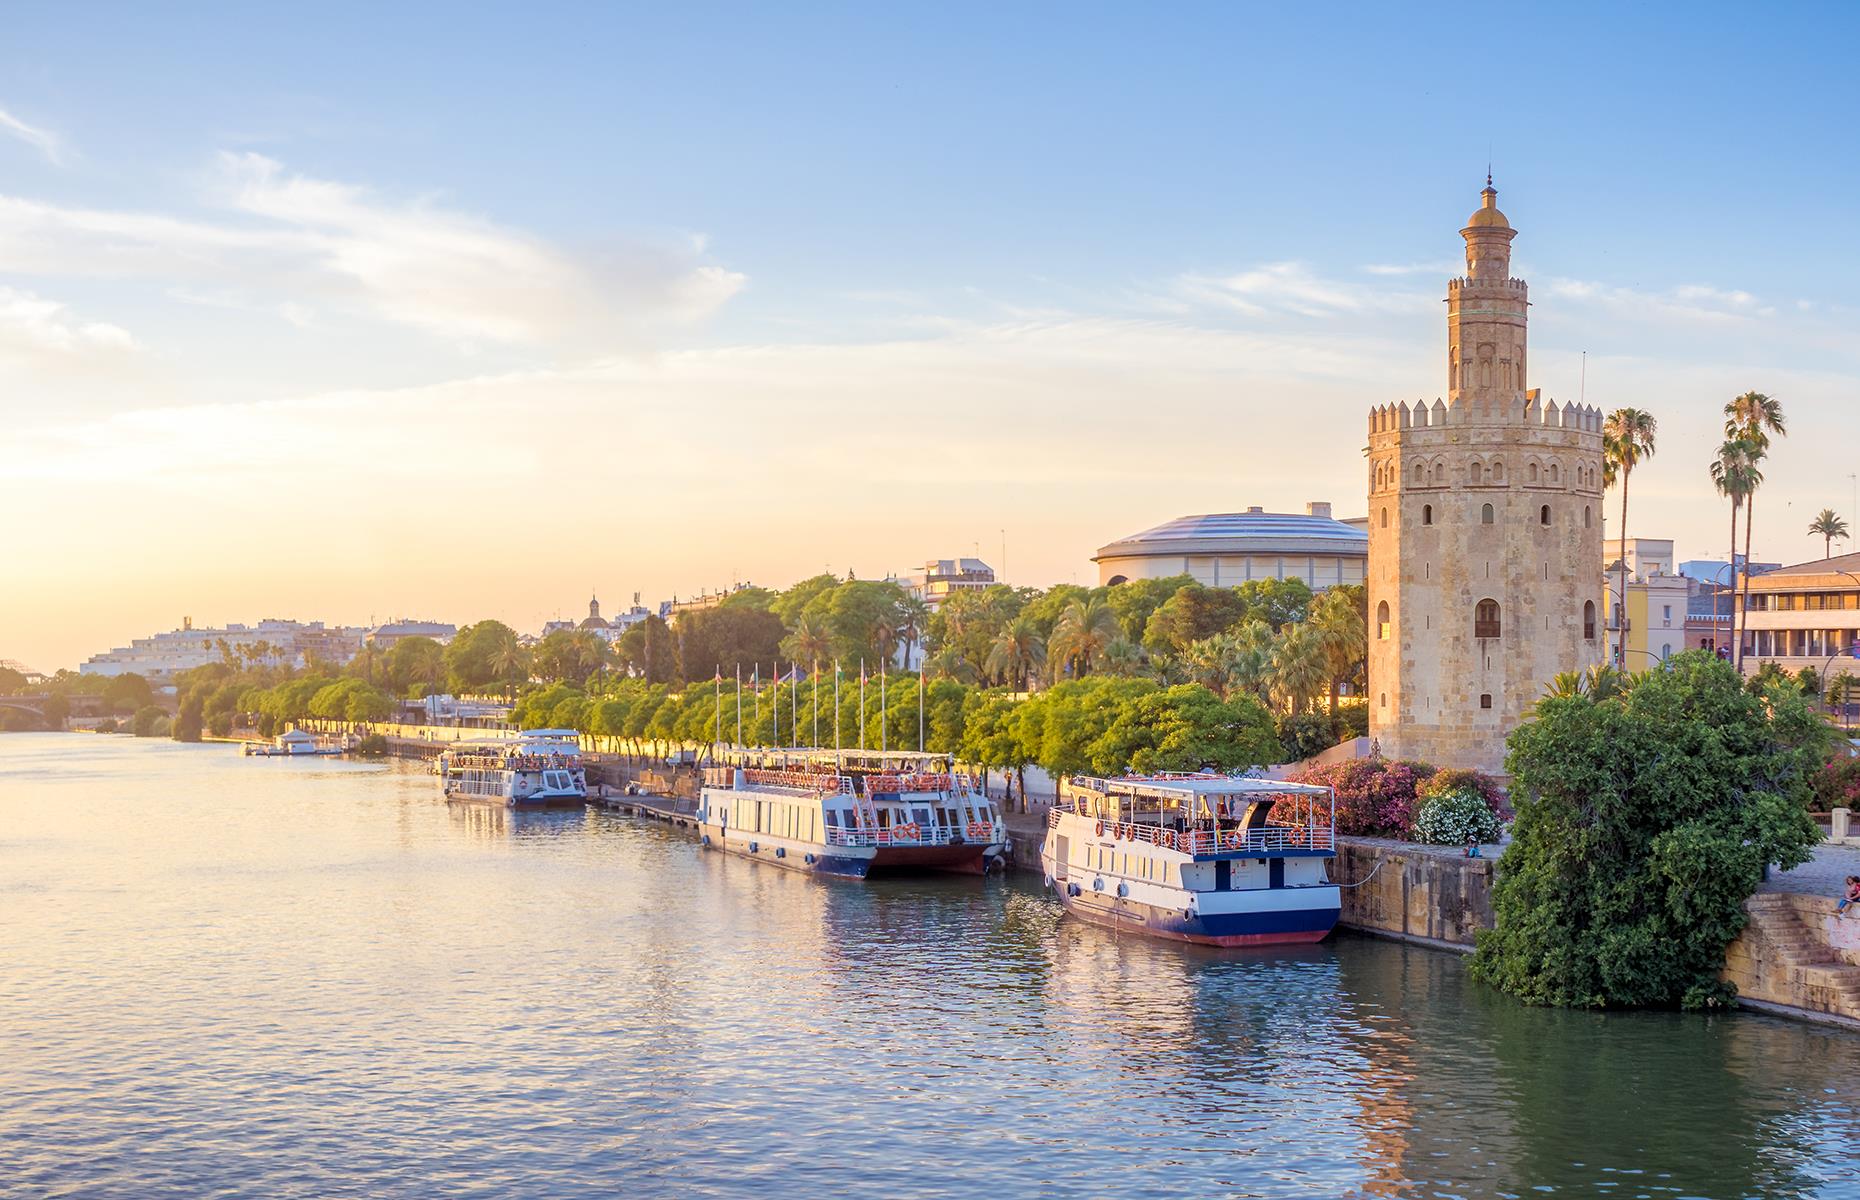 <p>River cruises can take you to some of the world’s most remote places, as well as waterways which simply aren’t explored very often. CroisiEurope, for example, is the only operator to offer cruises on Spain’s Guadalquivir River (pictured at Seville), while the Heritage Line’s new Upper Mekong cruise, which sets sail in August 2023, will focus on remote areas of Laos.</p>  <p><a href="https://www.loveexploring.com/galleries/92727/amazing-facts-about-cruise-ships-you-might-not-know?page=1"><strong>Amazing facts about cruise ships you might not know</strong></a></p>